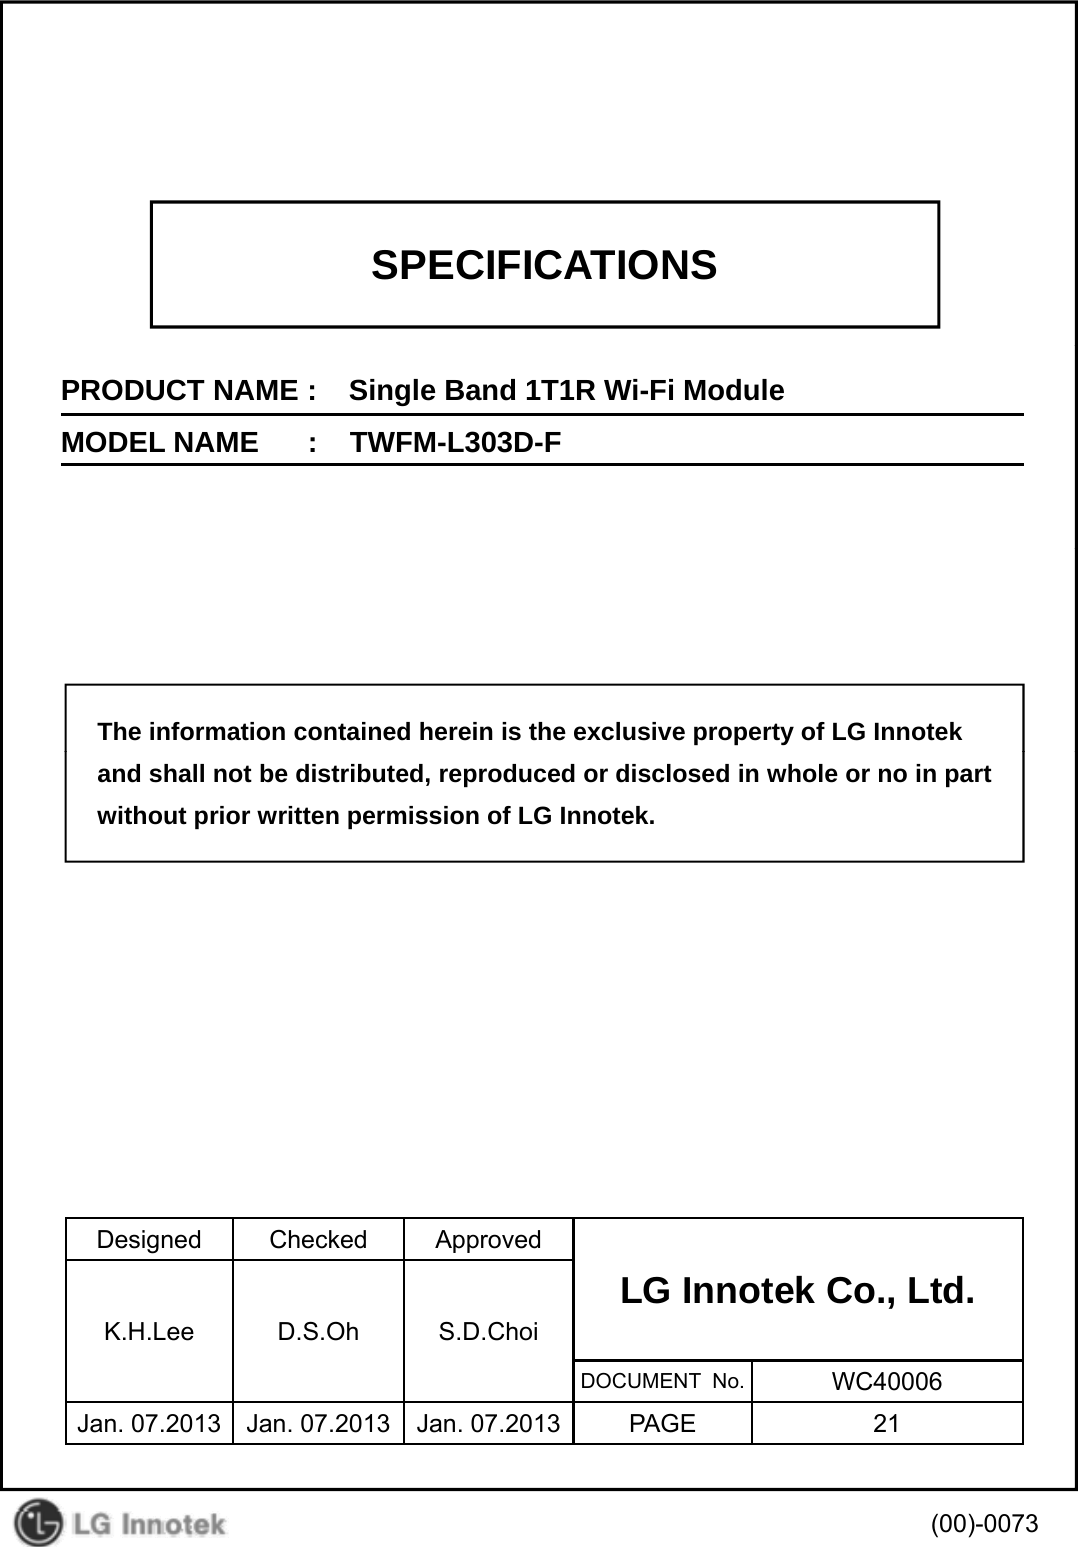 SPECIFICATIONSPRODUCT NAME :    Single Band 1T1R Wi-Fi ModuleMODEL NAME      :    TWFM-L303D-FThe information contained herein is the exclusive property of LG Innotekand shall not be distributed, reproduced or disclosed in whole or no in partwithout prior written permission of LG Innotek.Designed Checked ApprovedLG Innotek Co., Ltd.   K.H.Lee D.S.Oh S.D.ChoiDOCUMENT  No. WC40006Jan. 07.2013 Jan. 07.2013 Jan. 07.2013 PAGE 21(00)-0073